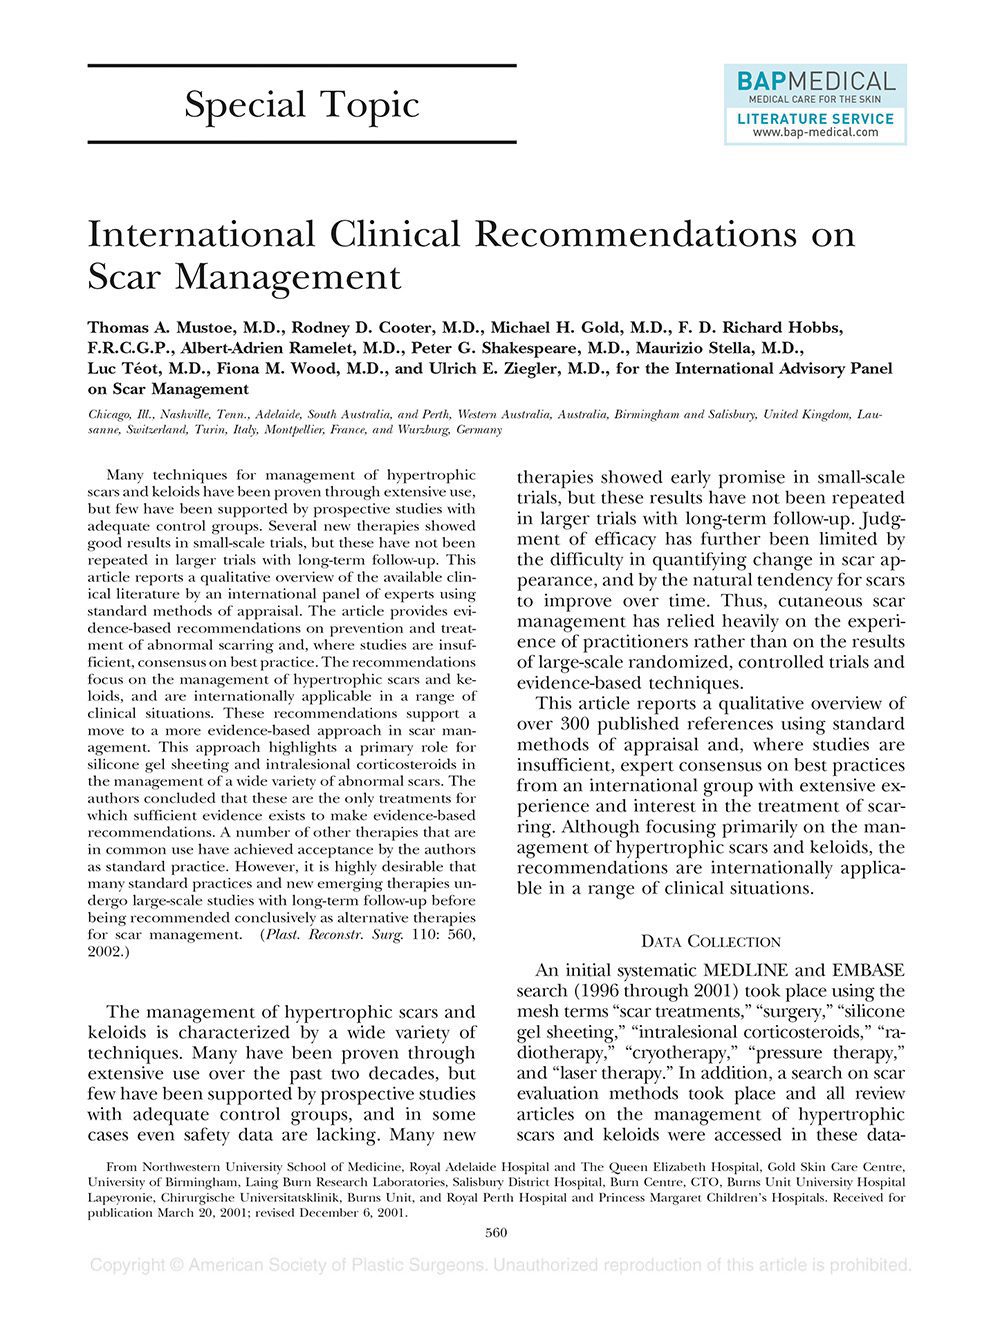 Bapscarcare clinical studies – International_Clinical_Recommendations_on_Scar_Man-1-1